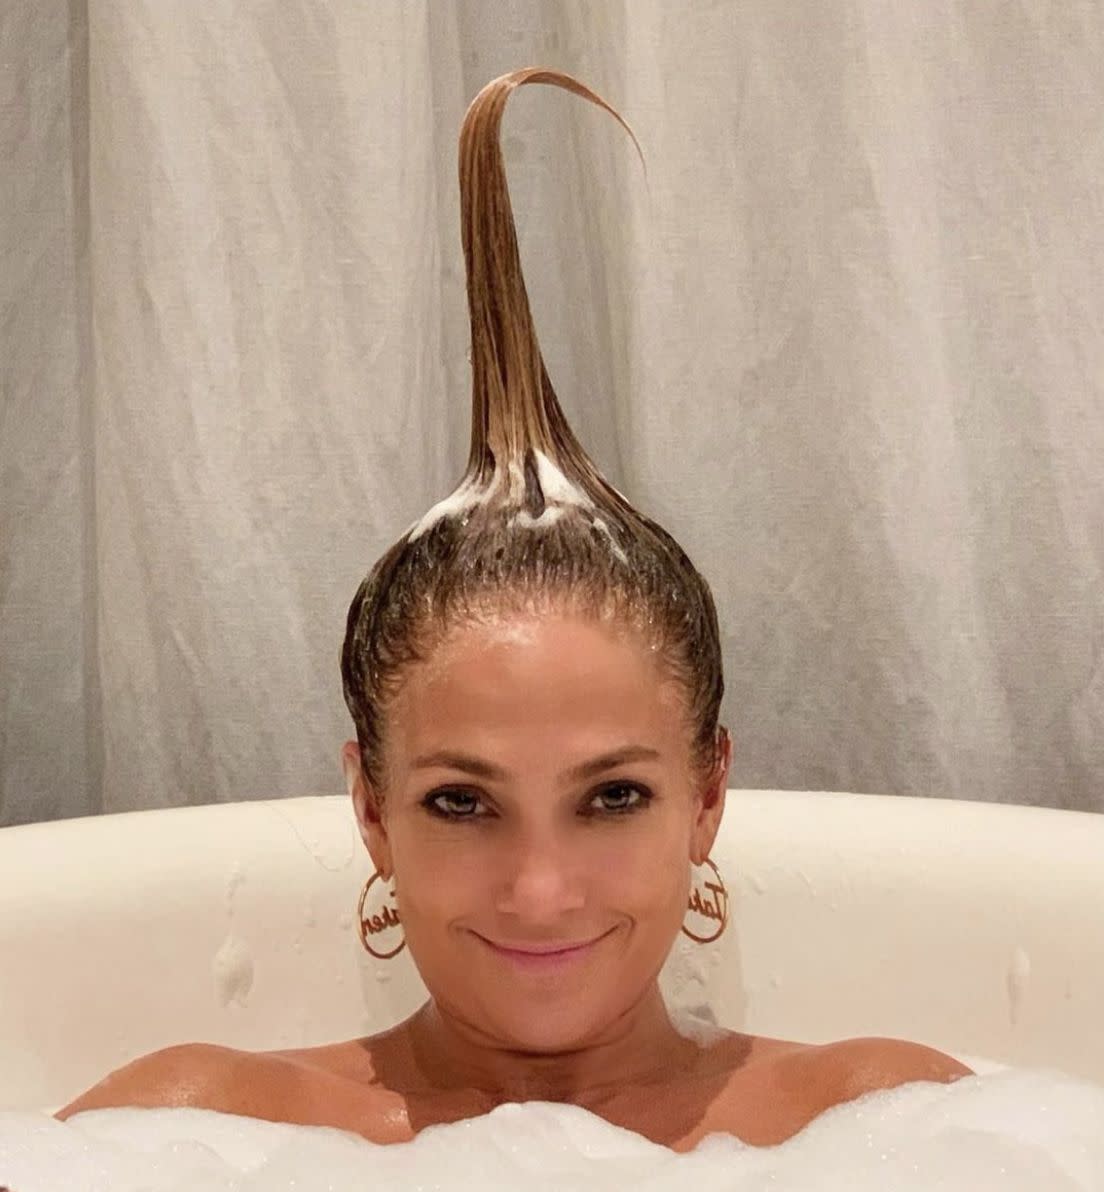 Jennifer Lopez has a laugh in the tub while enjoying "#SelfcareSunday #tubtime" on March 7, 2021.